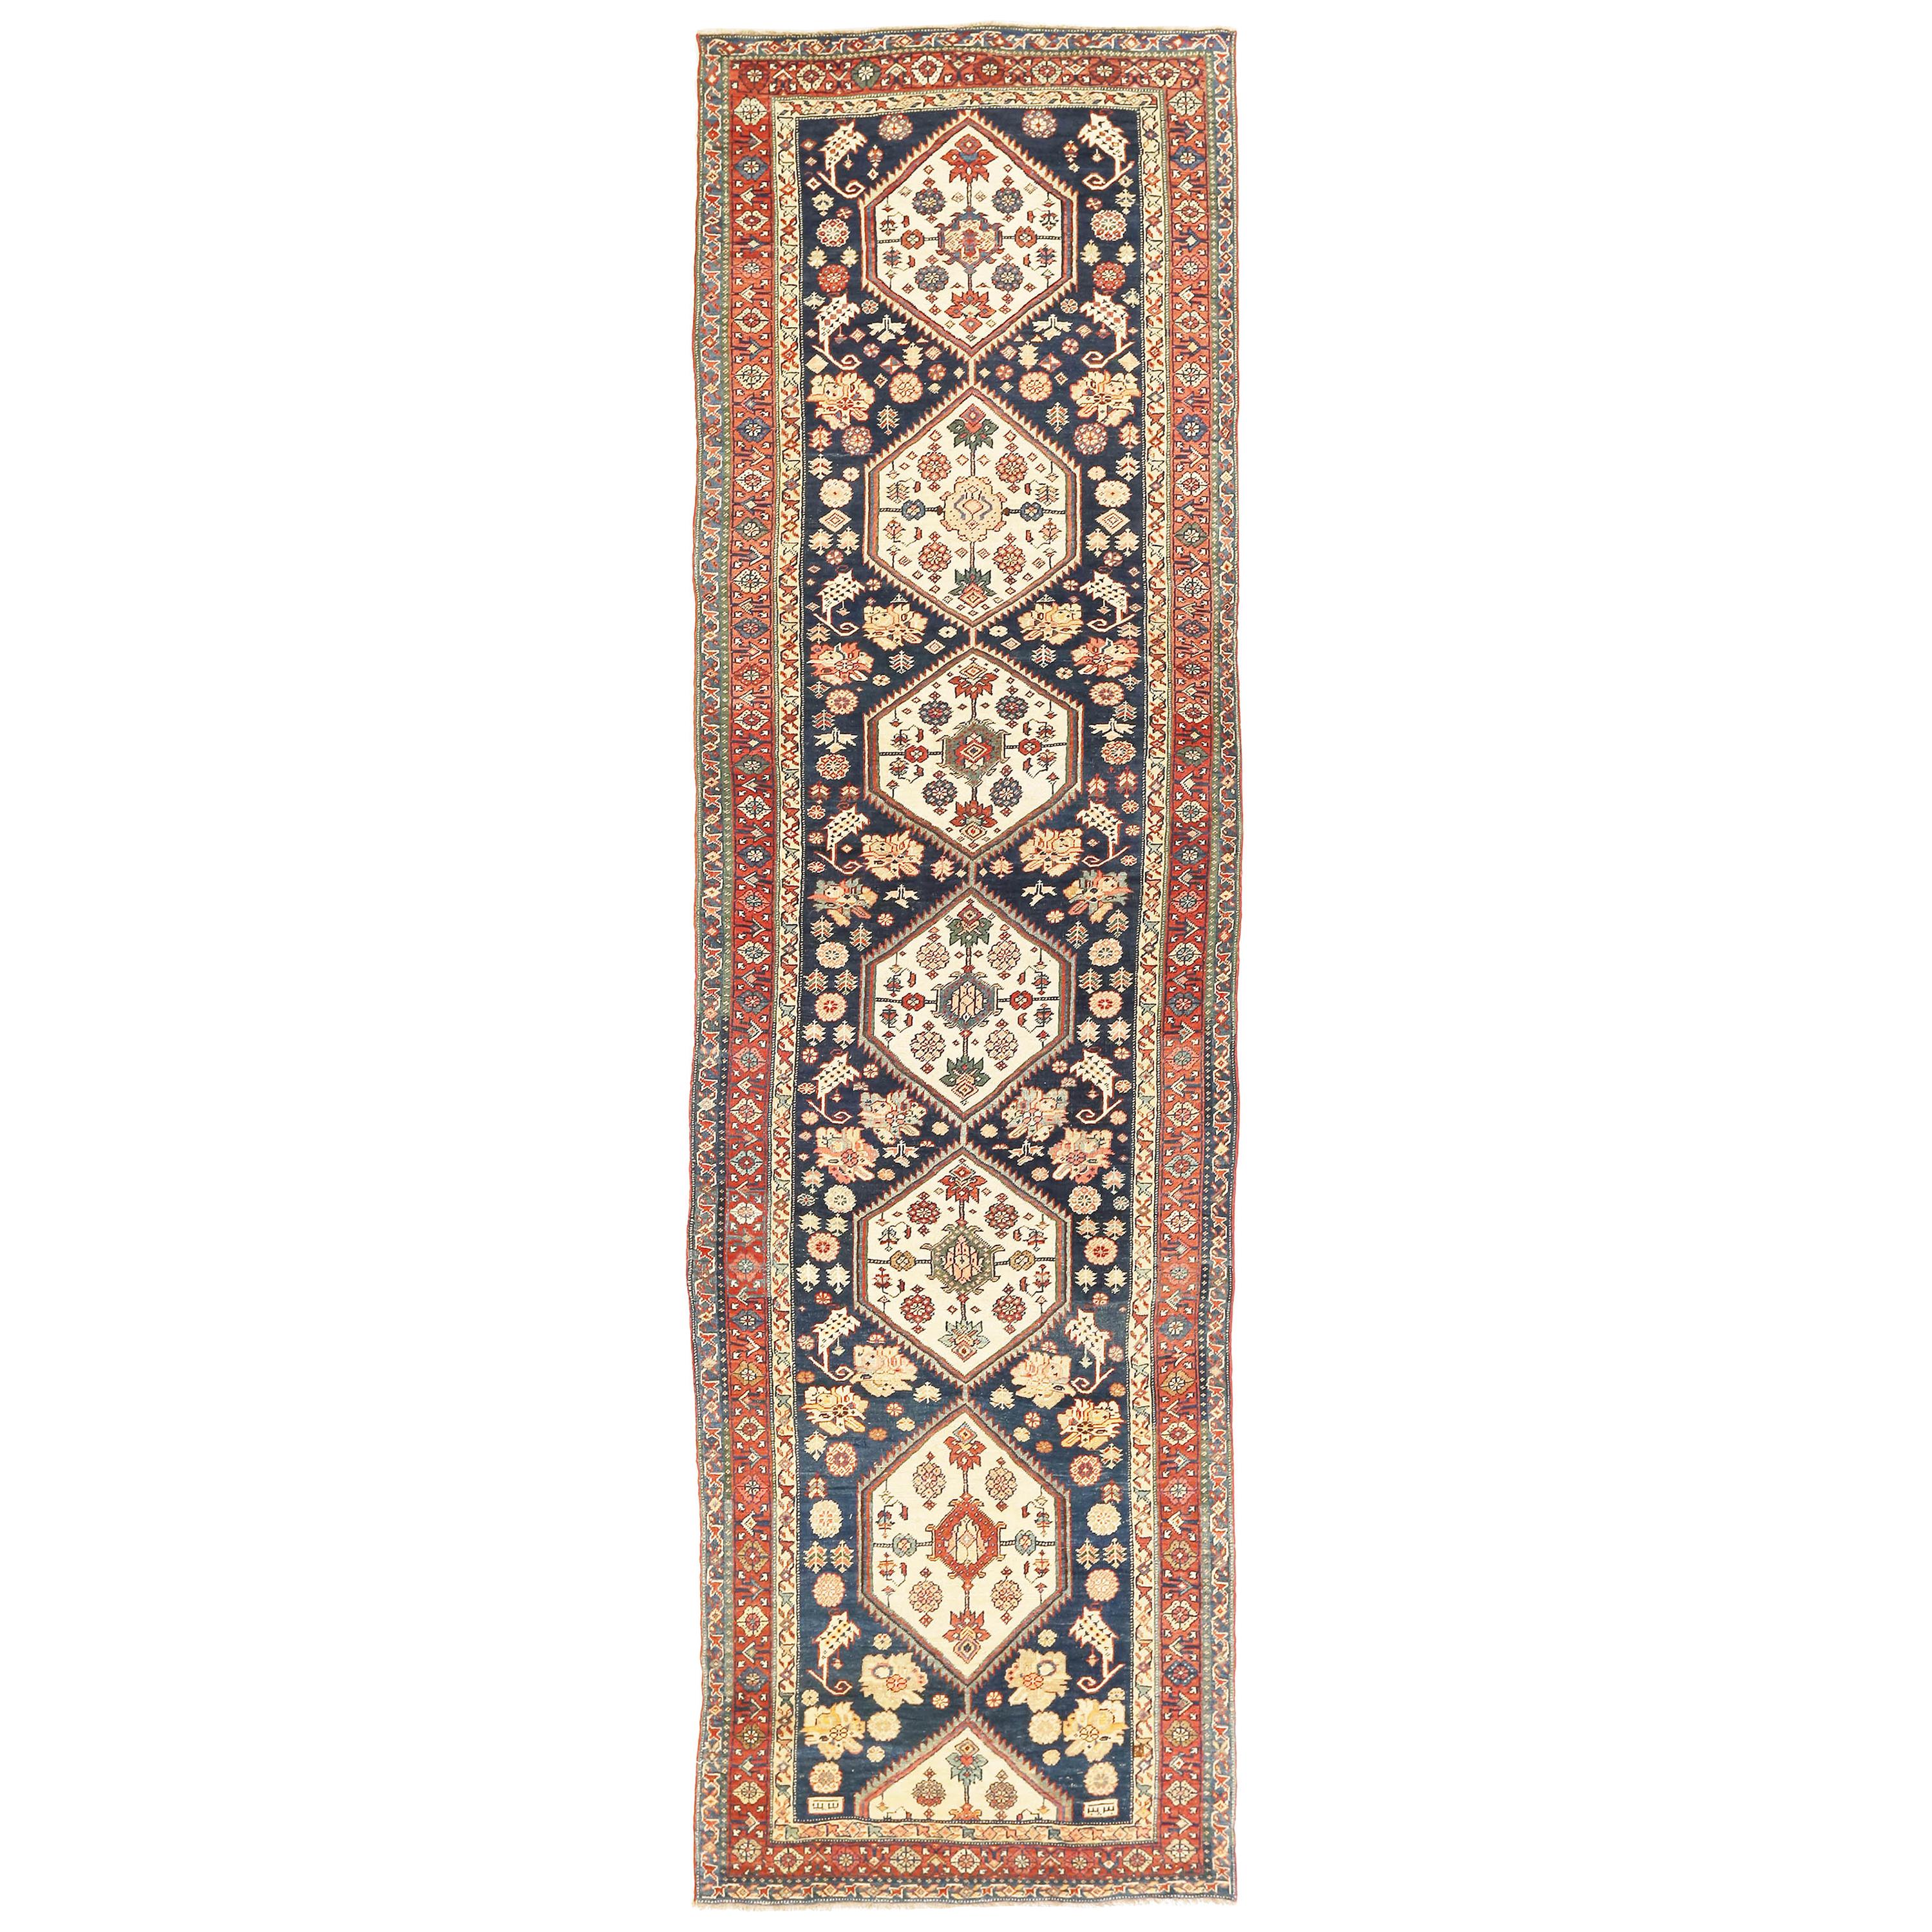 Antique Persian Bijar Runner Rug with Ivory Floral Medallions